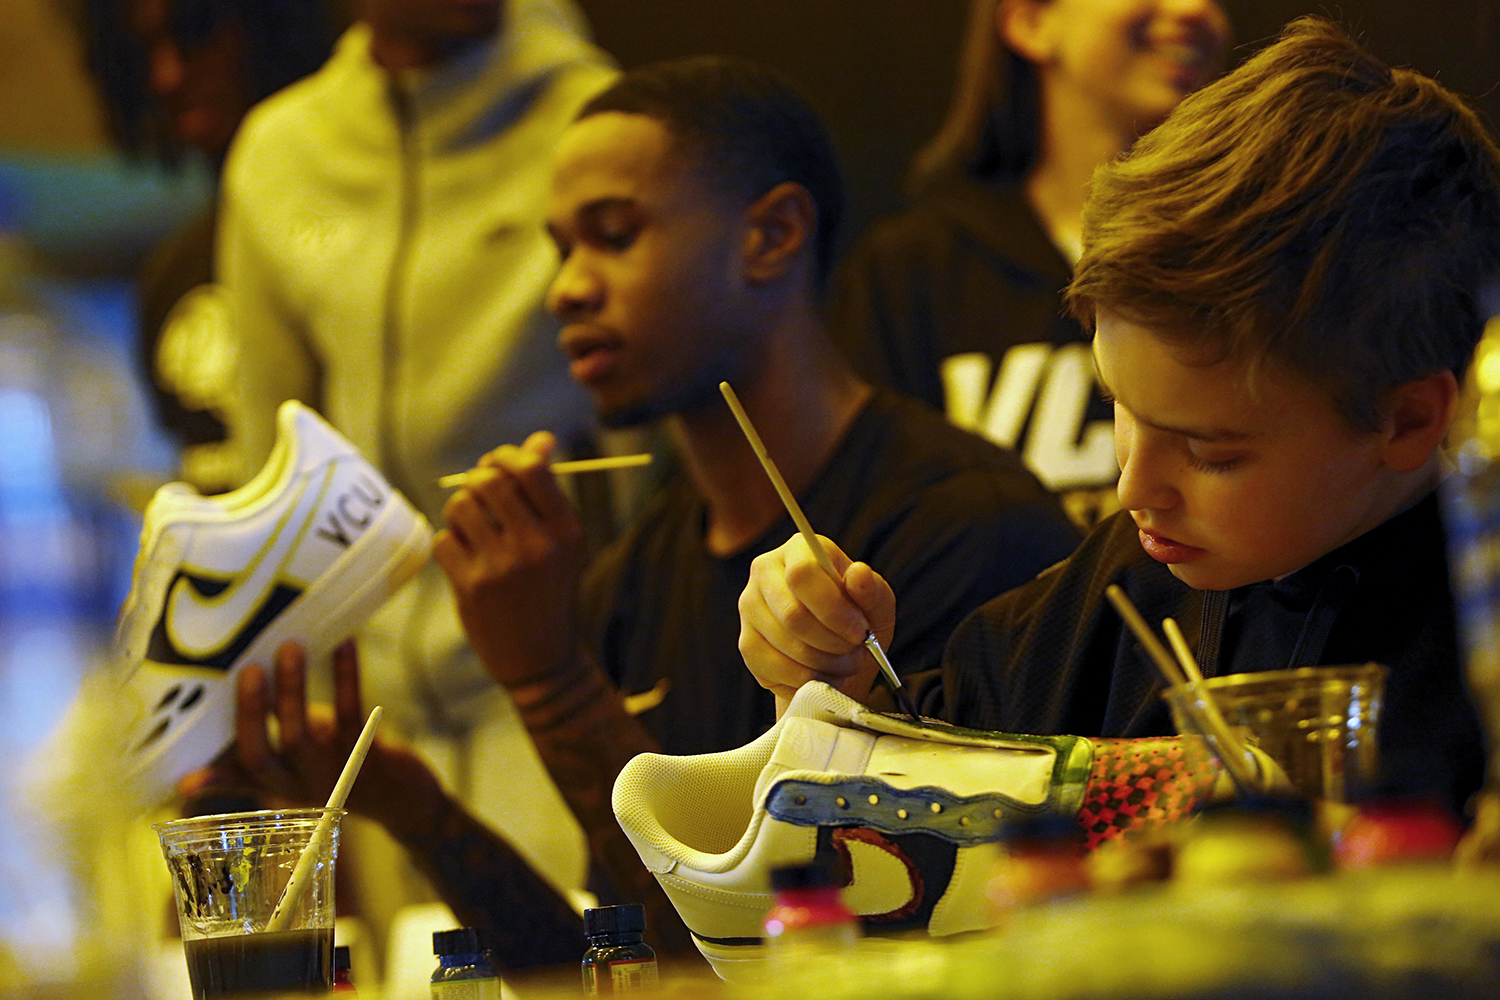 VCU basketball's Zeb Jackson paints sneakers next to CHoR patient Thomas Carley